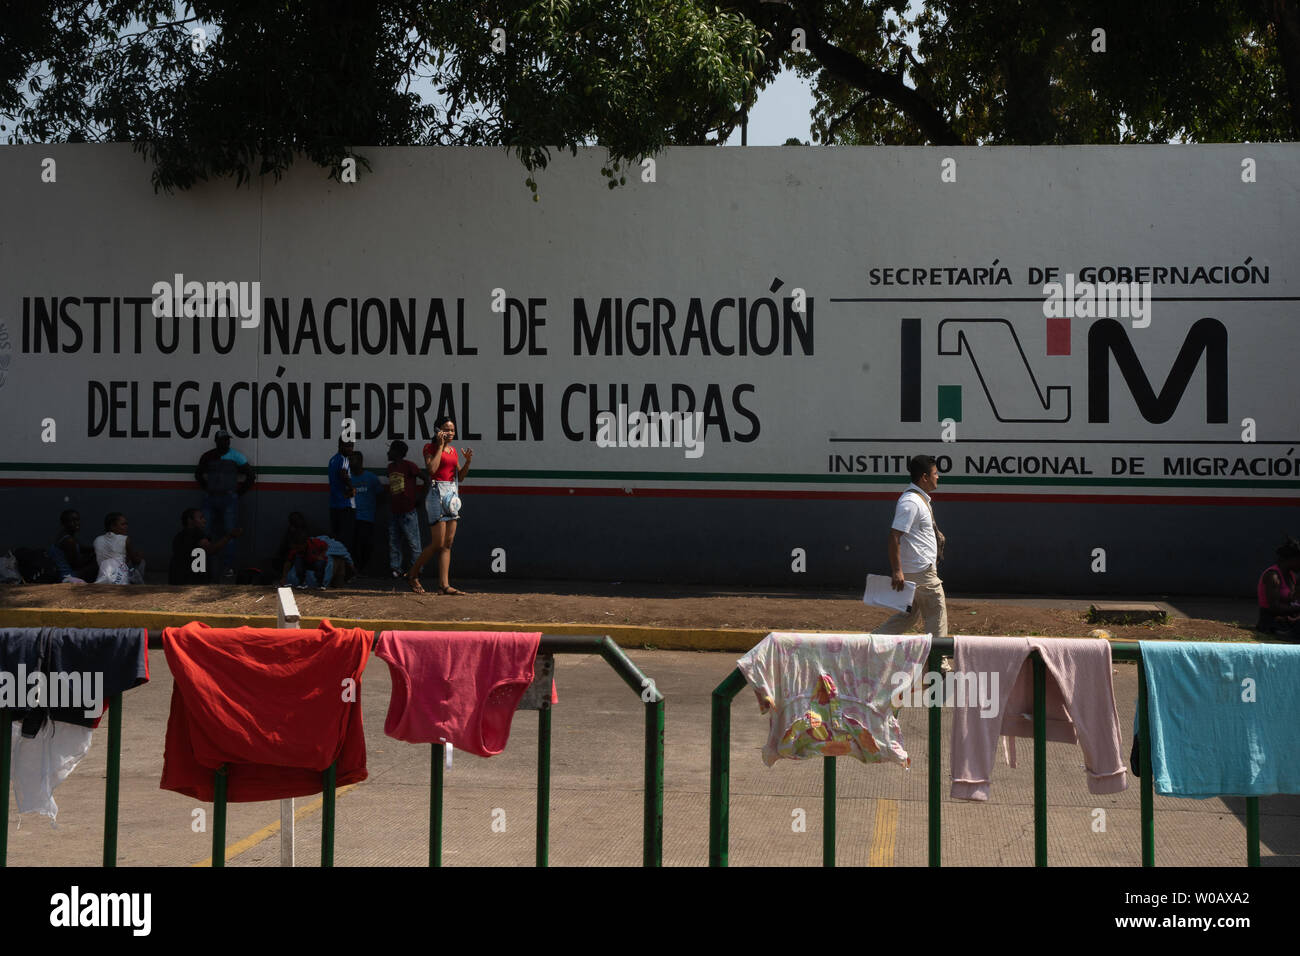 Migrants wait in front of (INM) Instituto Nacional de Migración Delegación  Federal en Chiapas in Tapachula, Mexico for their number to be called on  May 9, 2019. Once their number is called